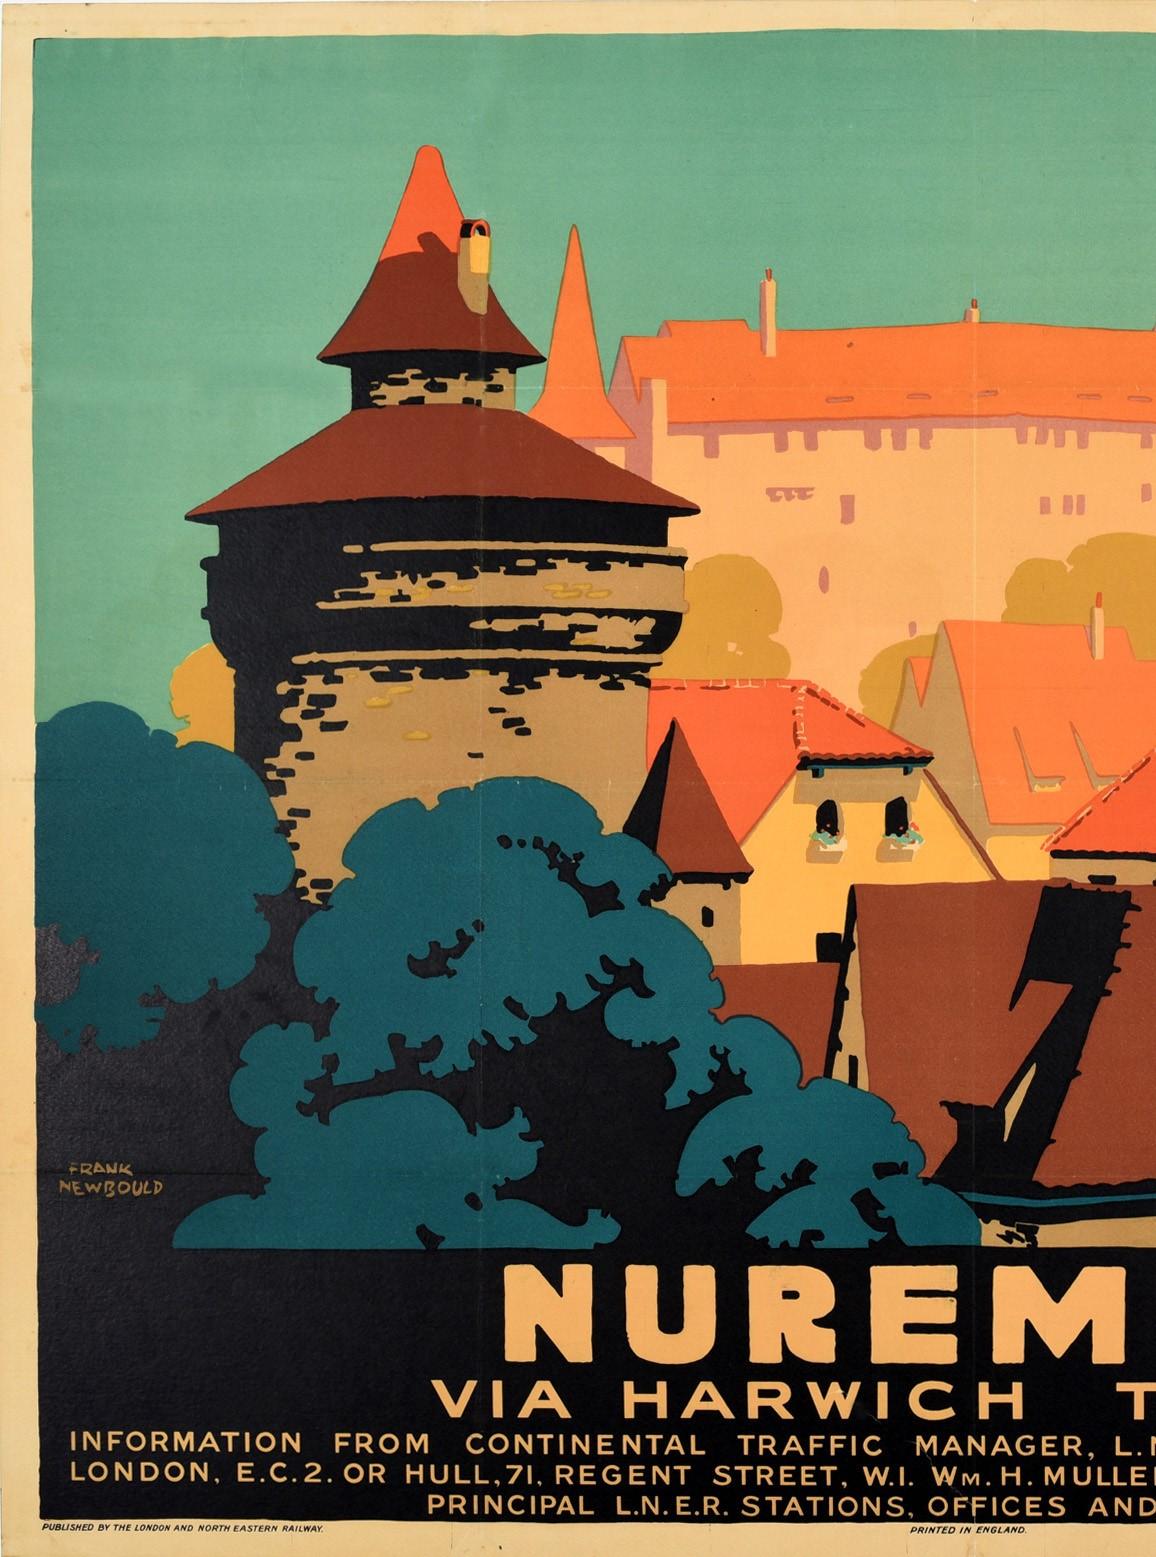 Original vintage LNER railway poster by the notable British poster artist Frank Newbould (1887-1951): Nuremburg via Harwich Twice a Day. Great design depicting a view over the roof tops of the medieval Nuremberg Castle and tree tops in the historic